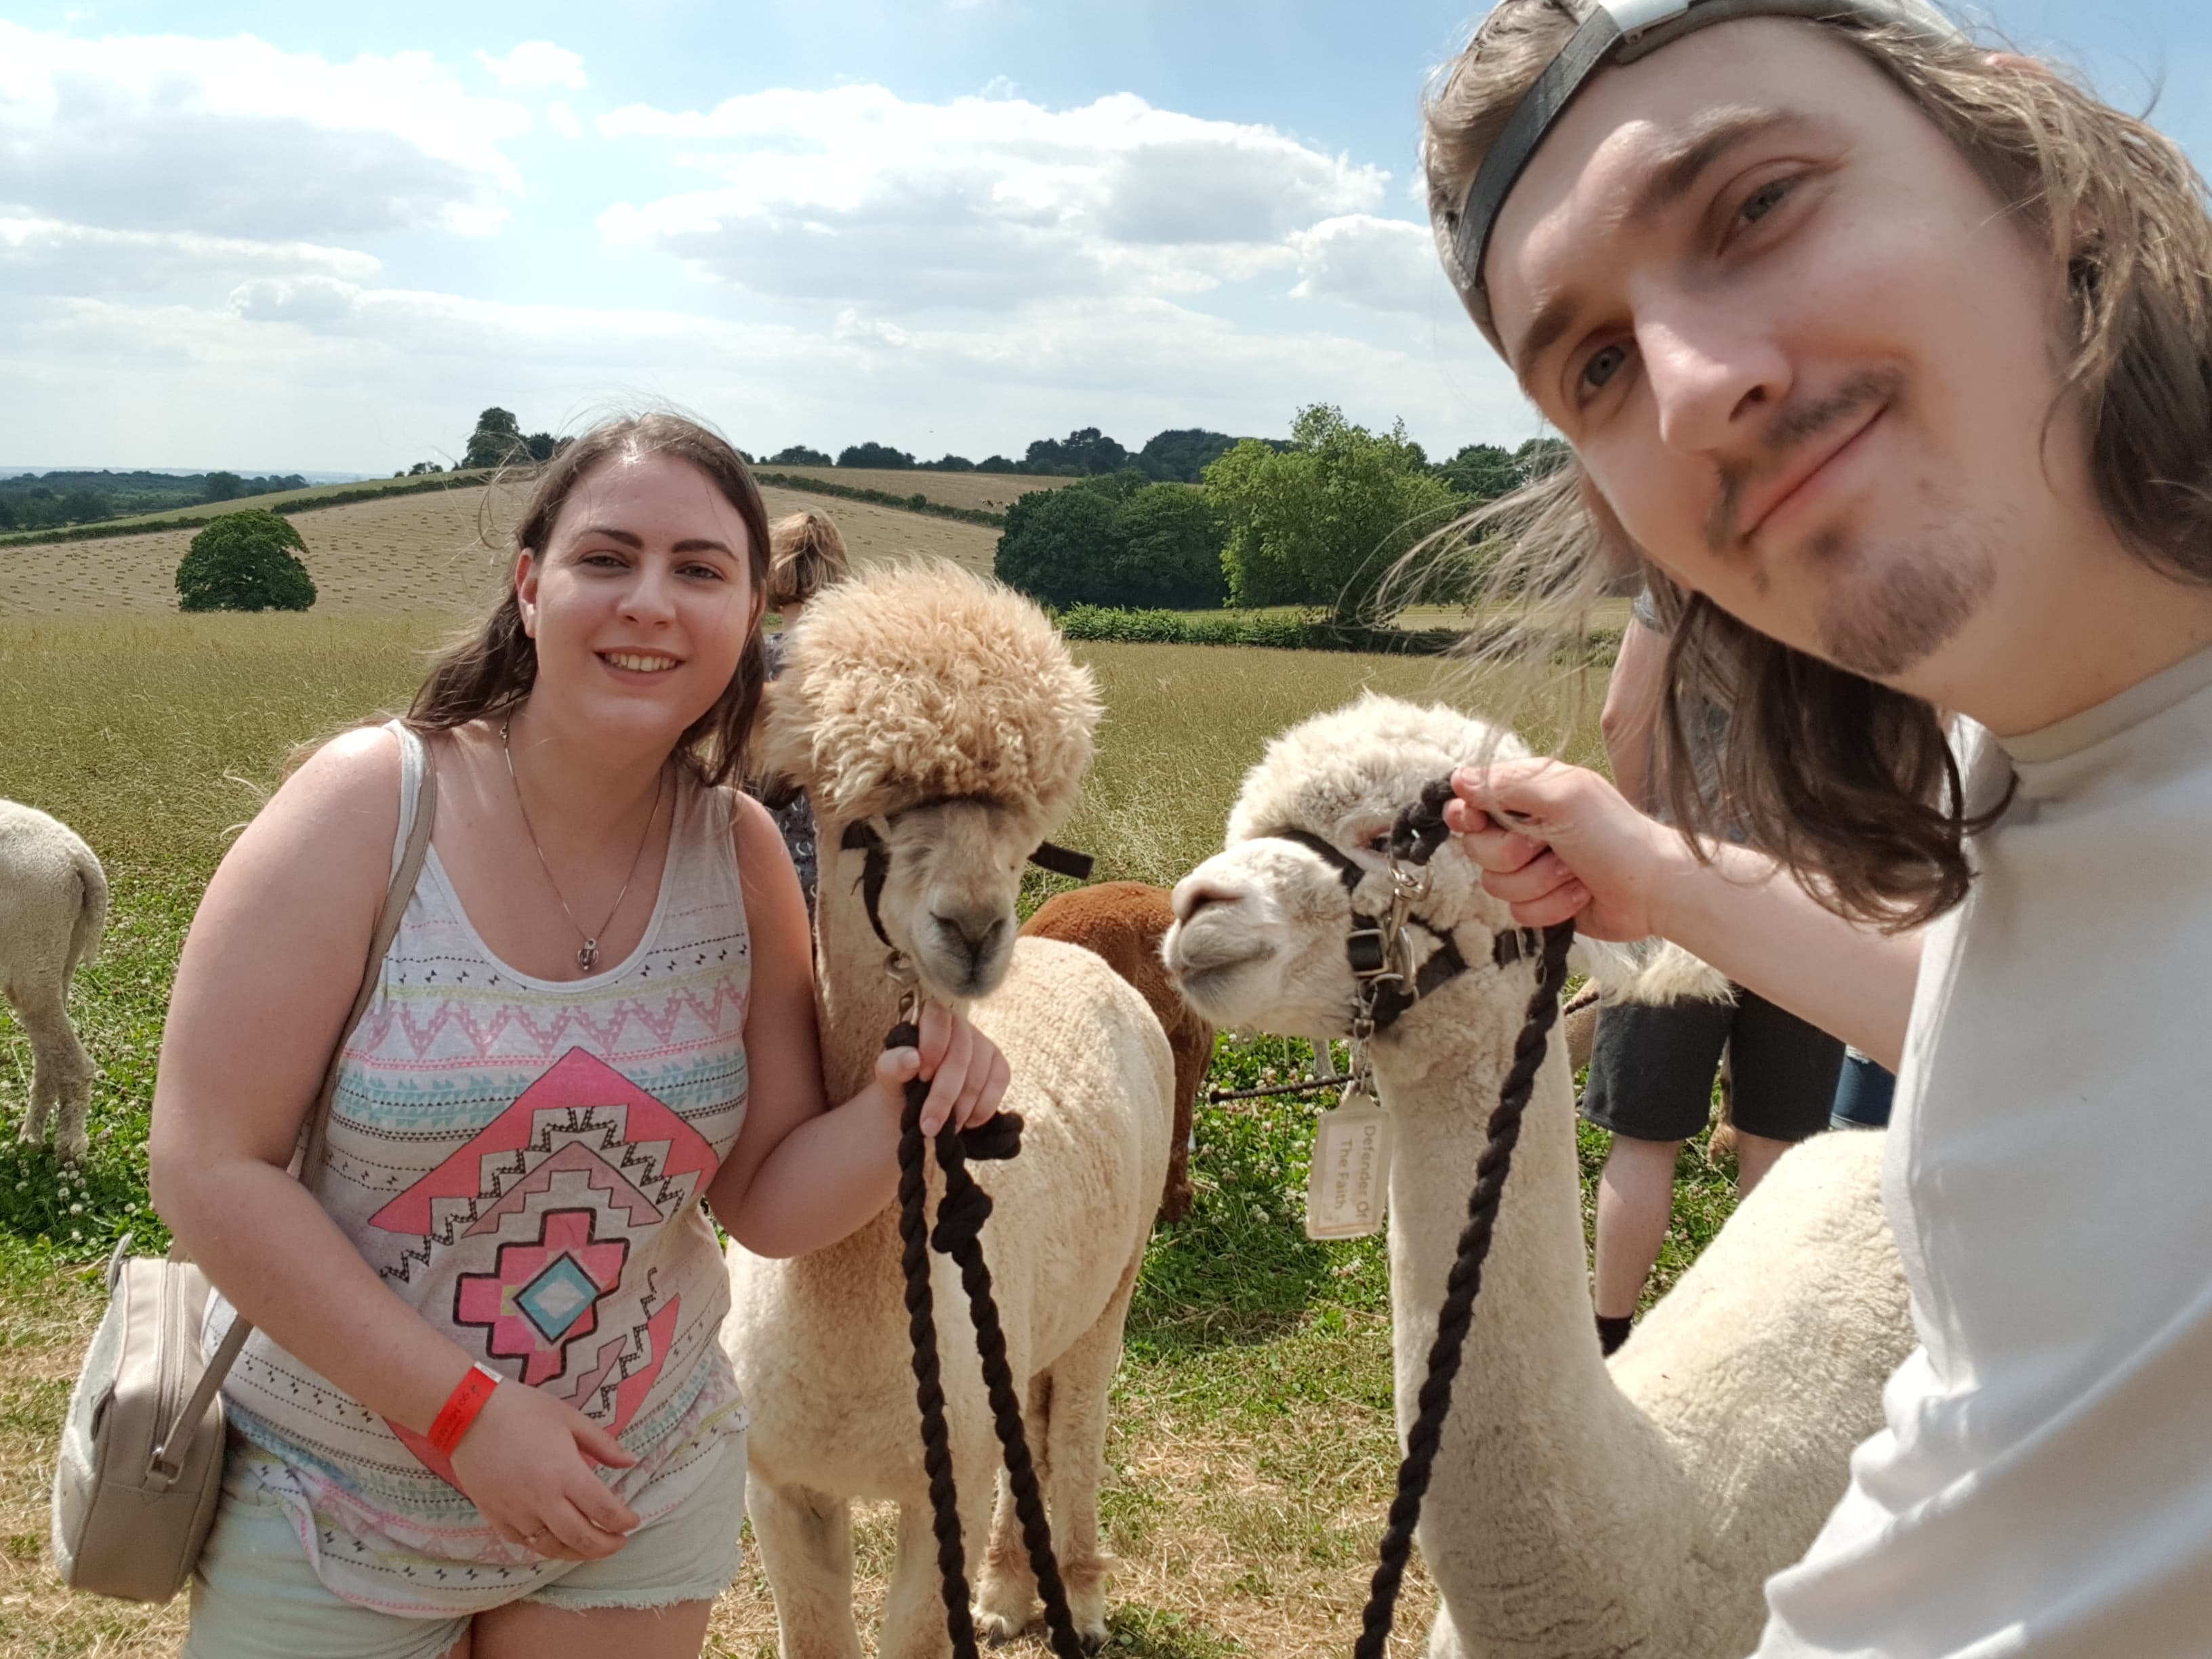 A girl and guy holding two alpacas by ropes under their chins to take a selfie with them